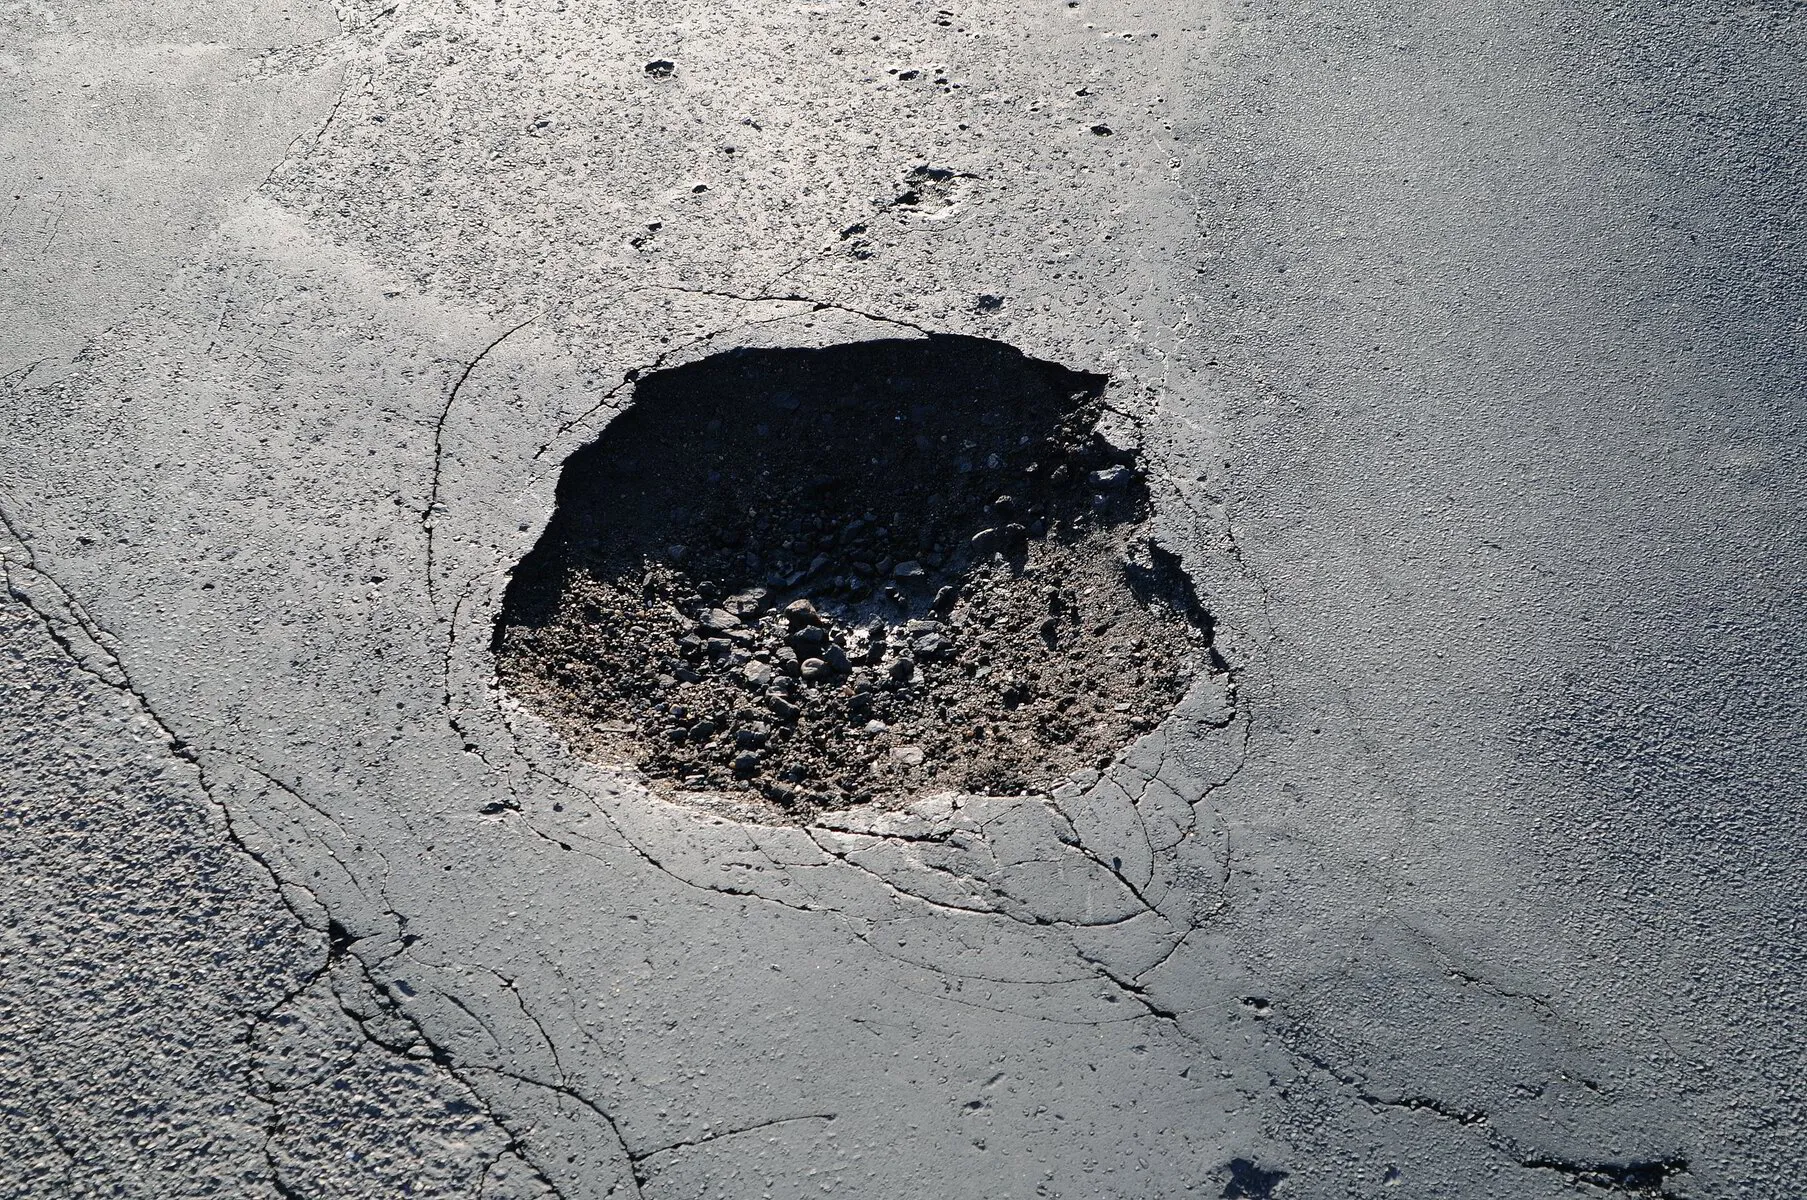 Frost Heaves and Potholes: How They Trash Your Car